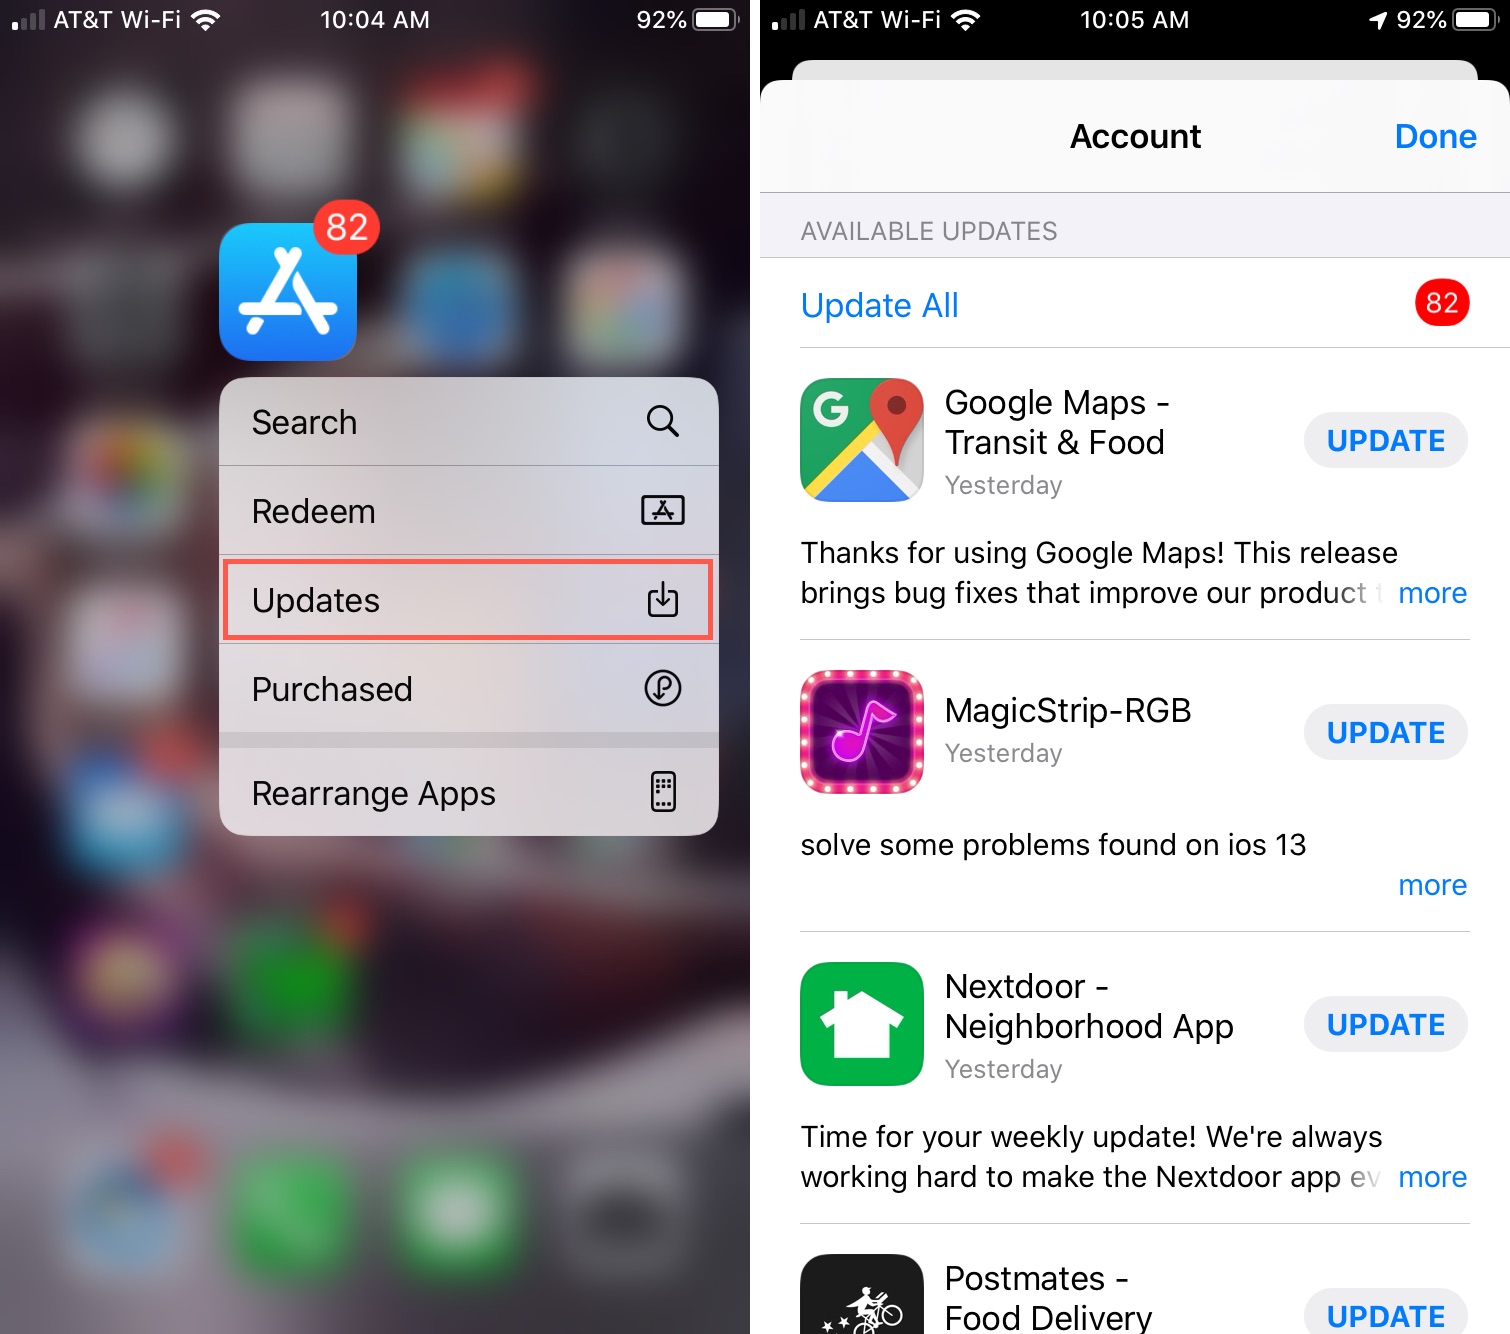 How to quickly access App Store updates from your Home screen